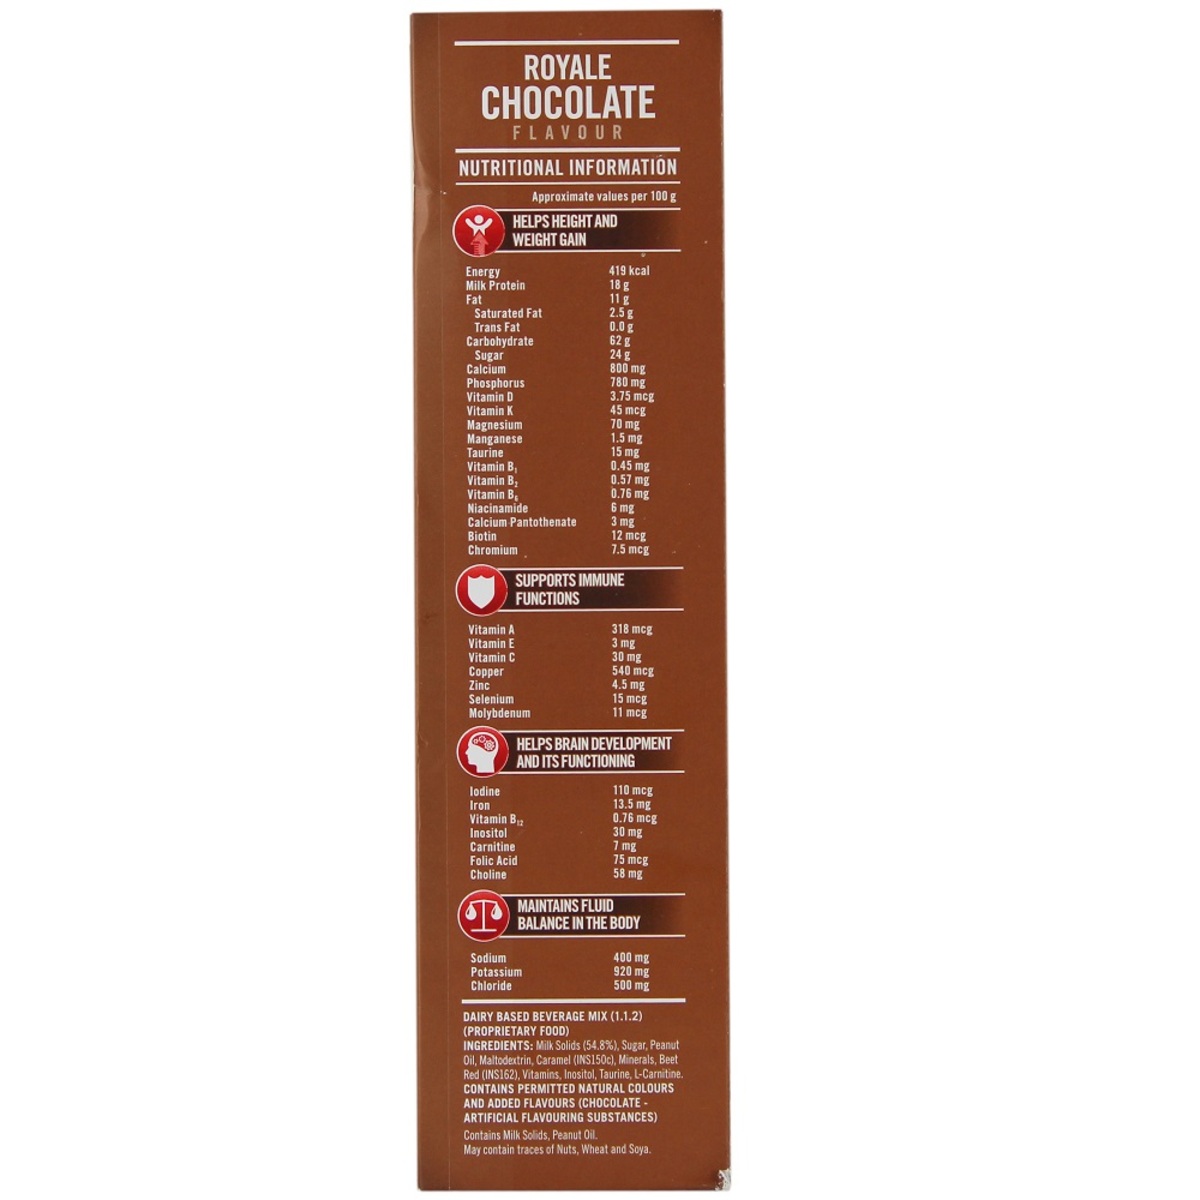 Complan Chocolate Drink Refill 750g